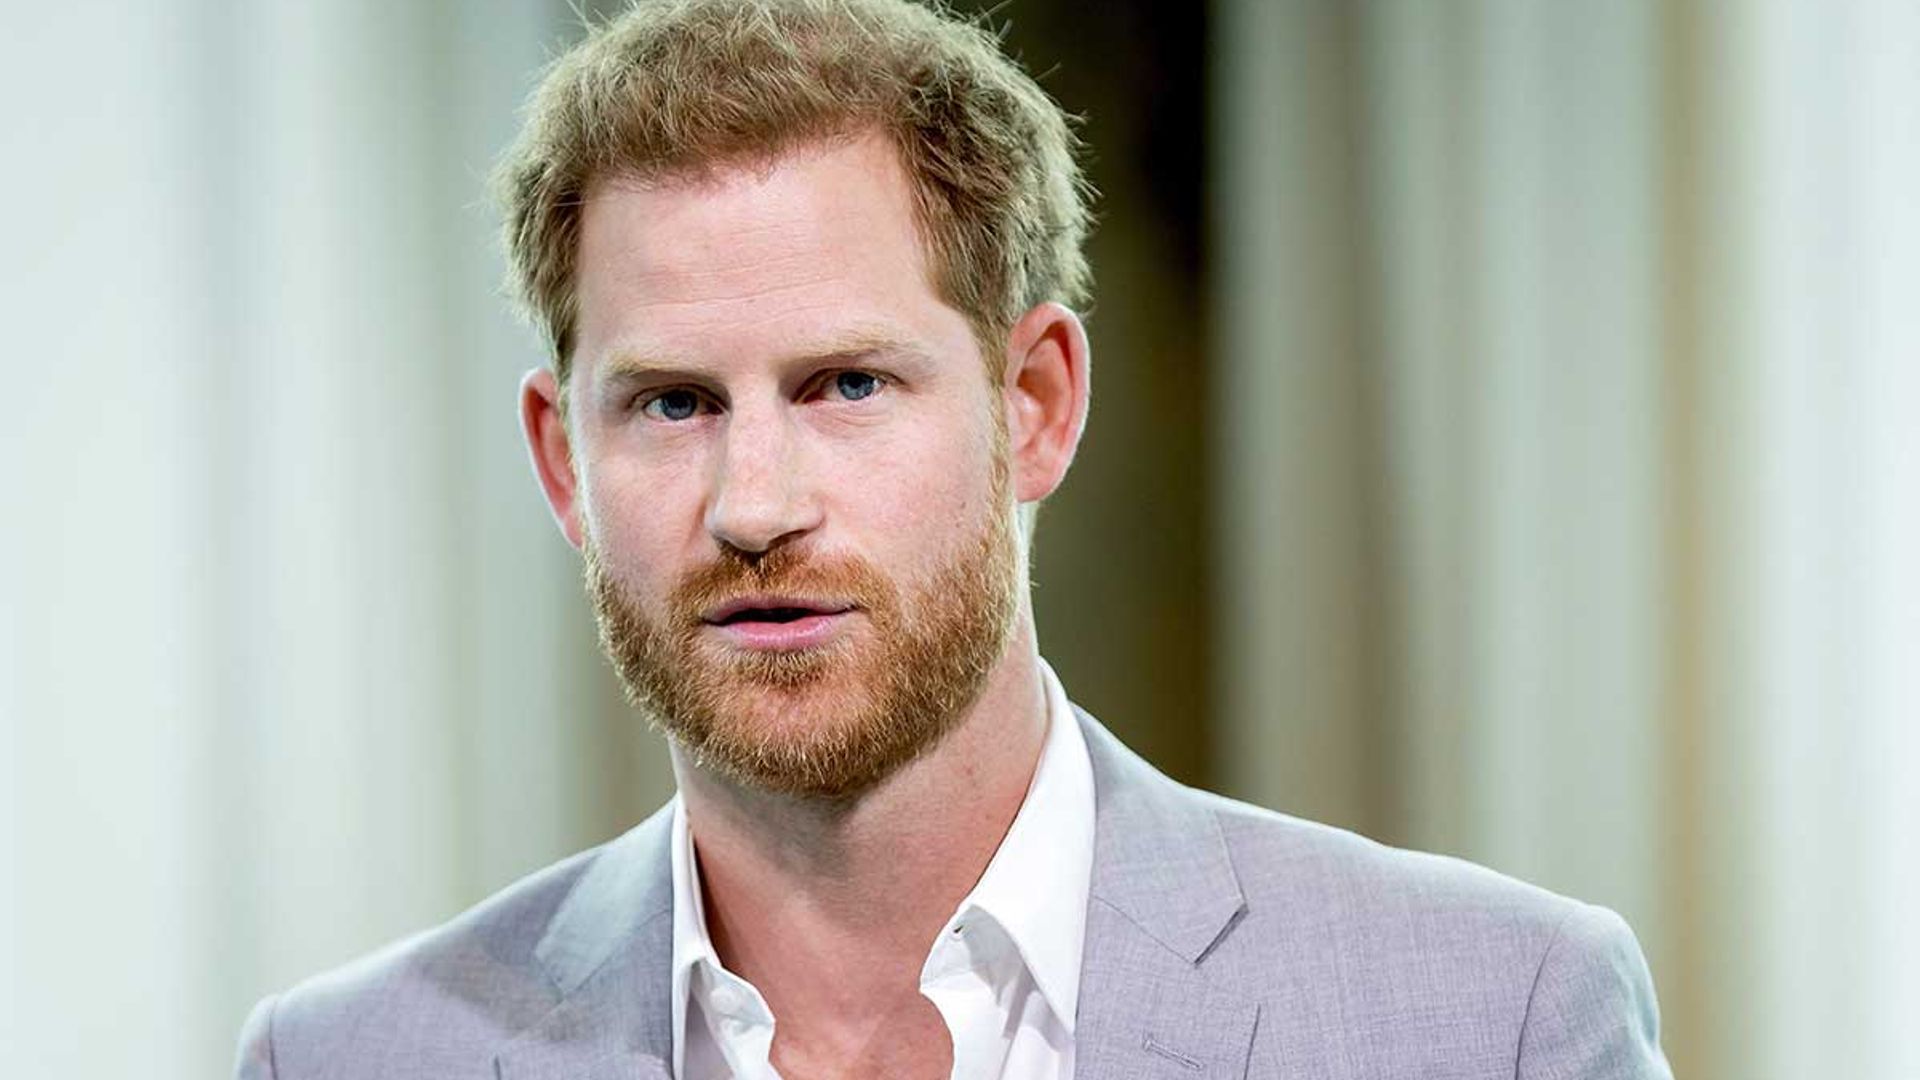 prince harry arrives in london